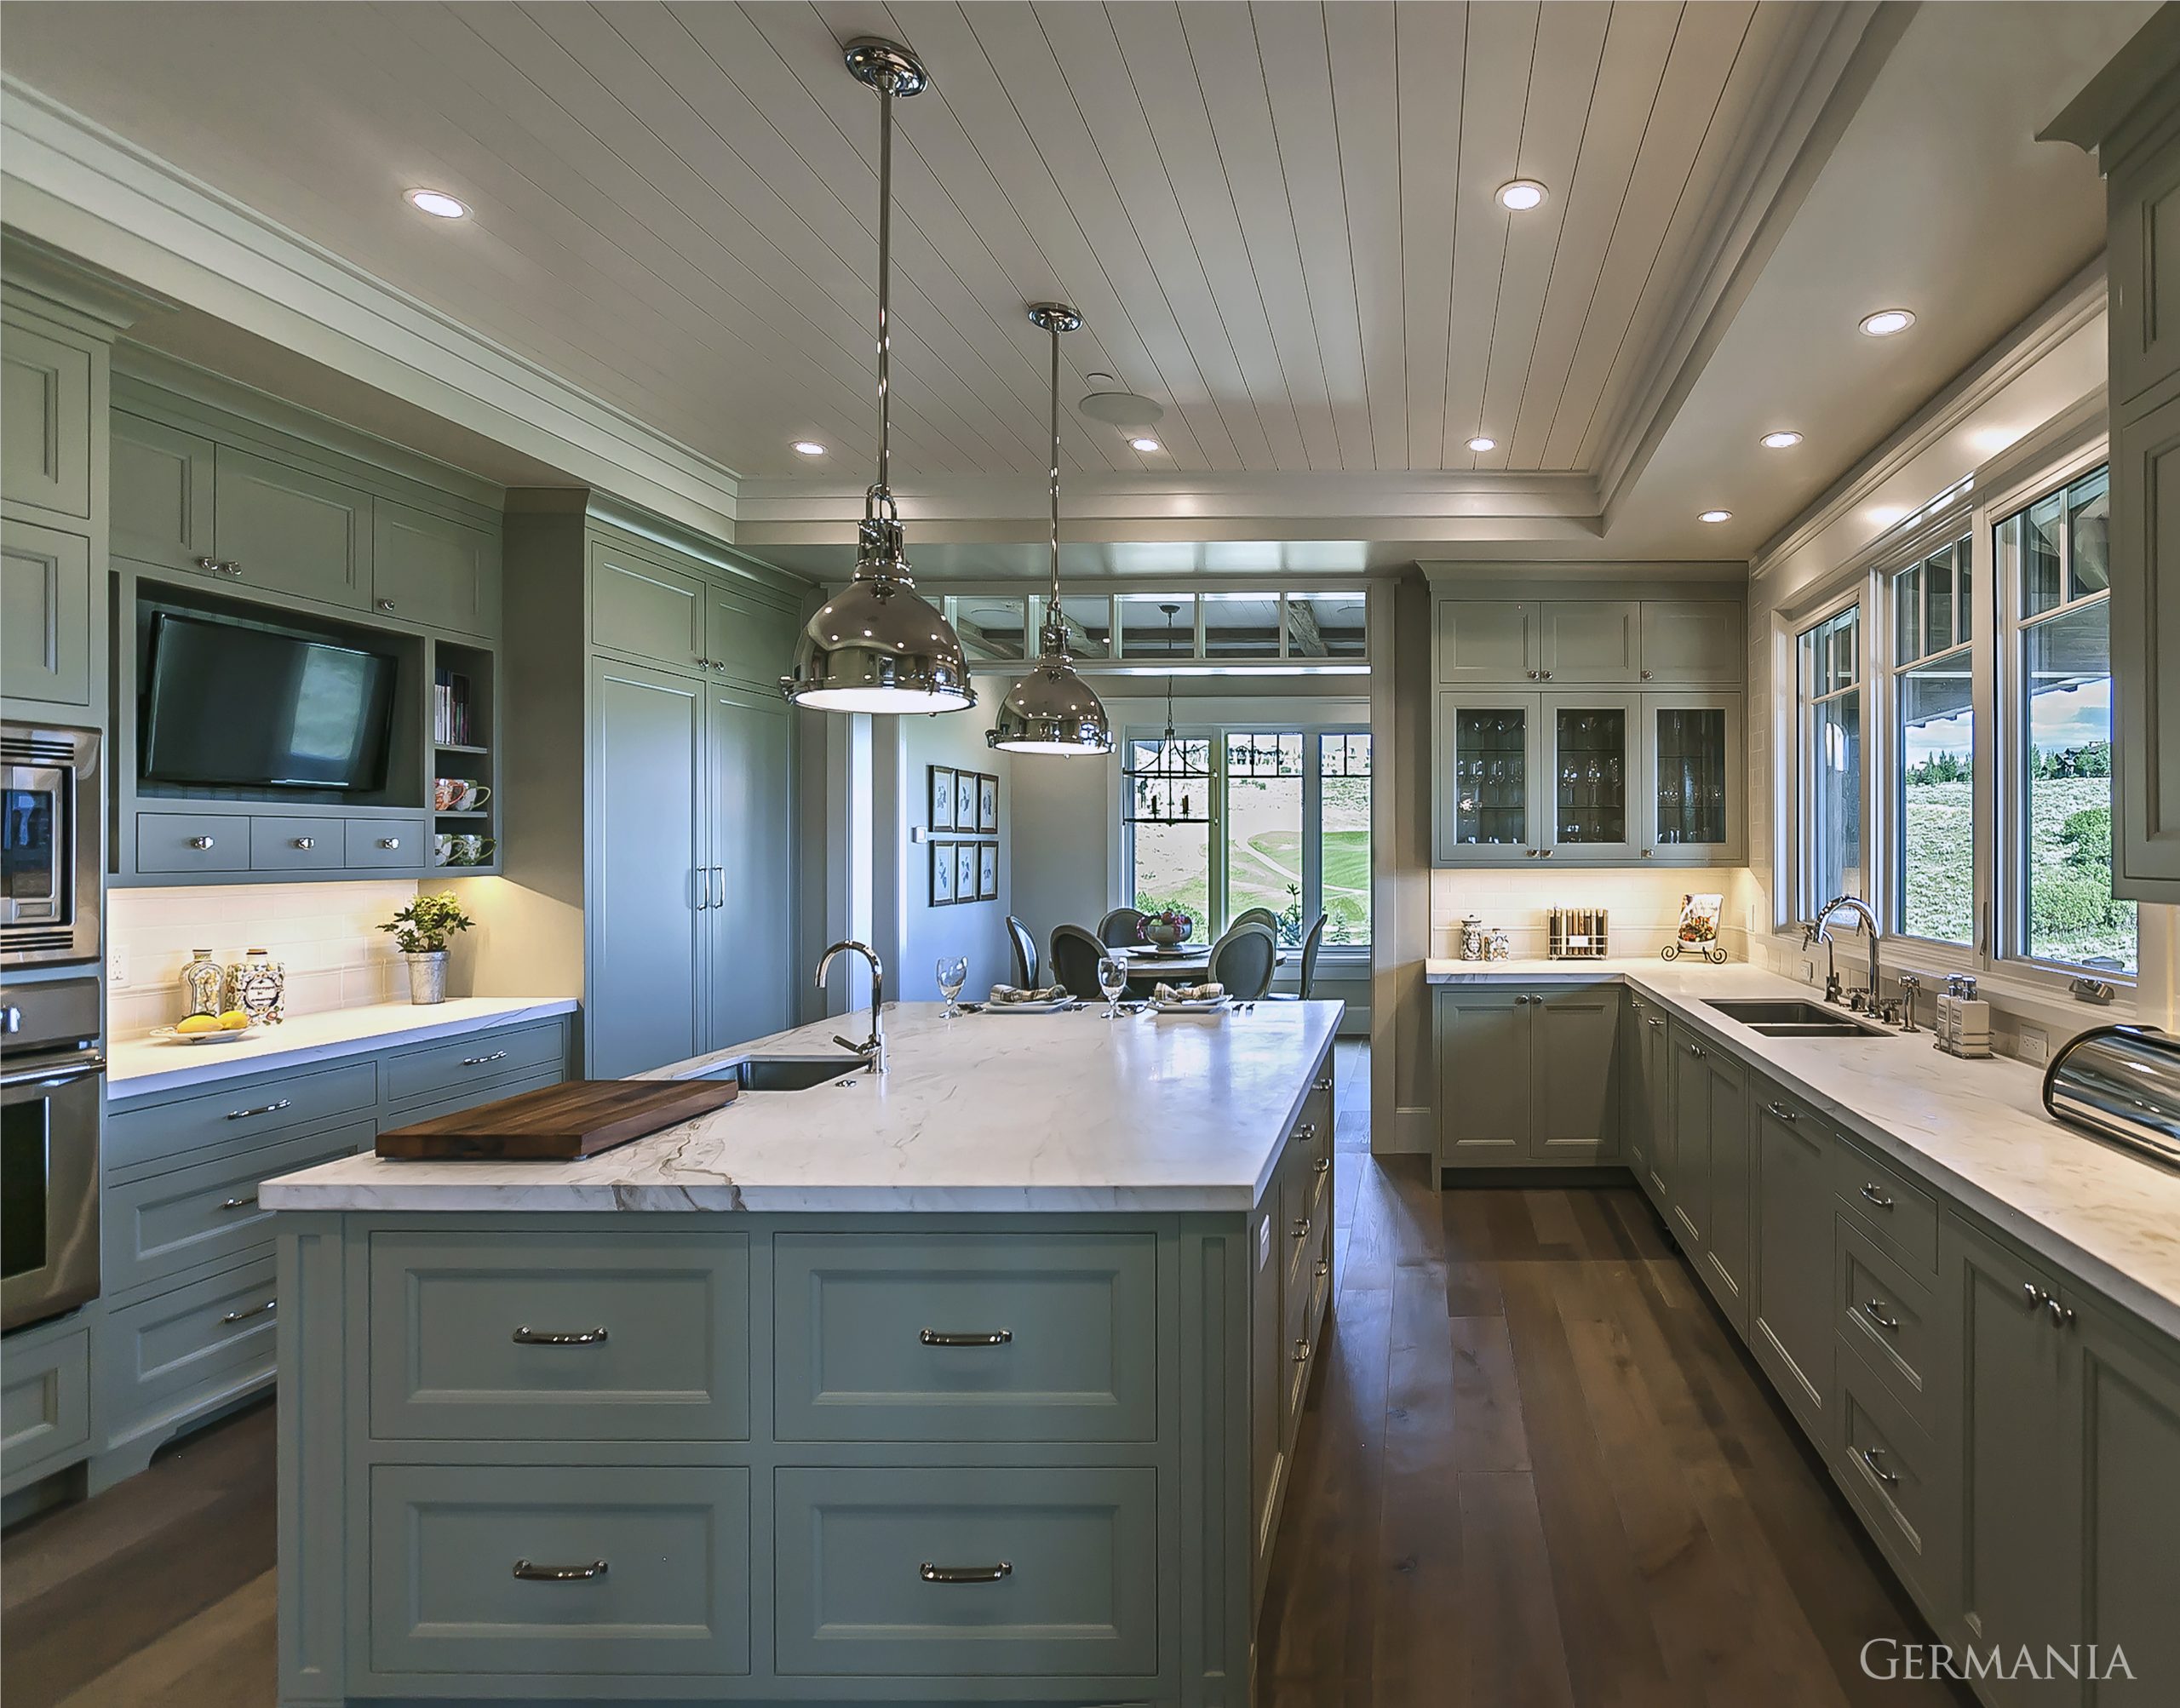 Choosing a custom home construction for your kitchen can be intense. Kitchen island or no? What about the cabinets? What about countertops? Germania Construction is there from fit to finish in the entire construction process.